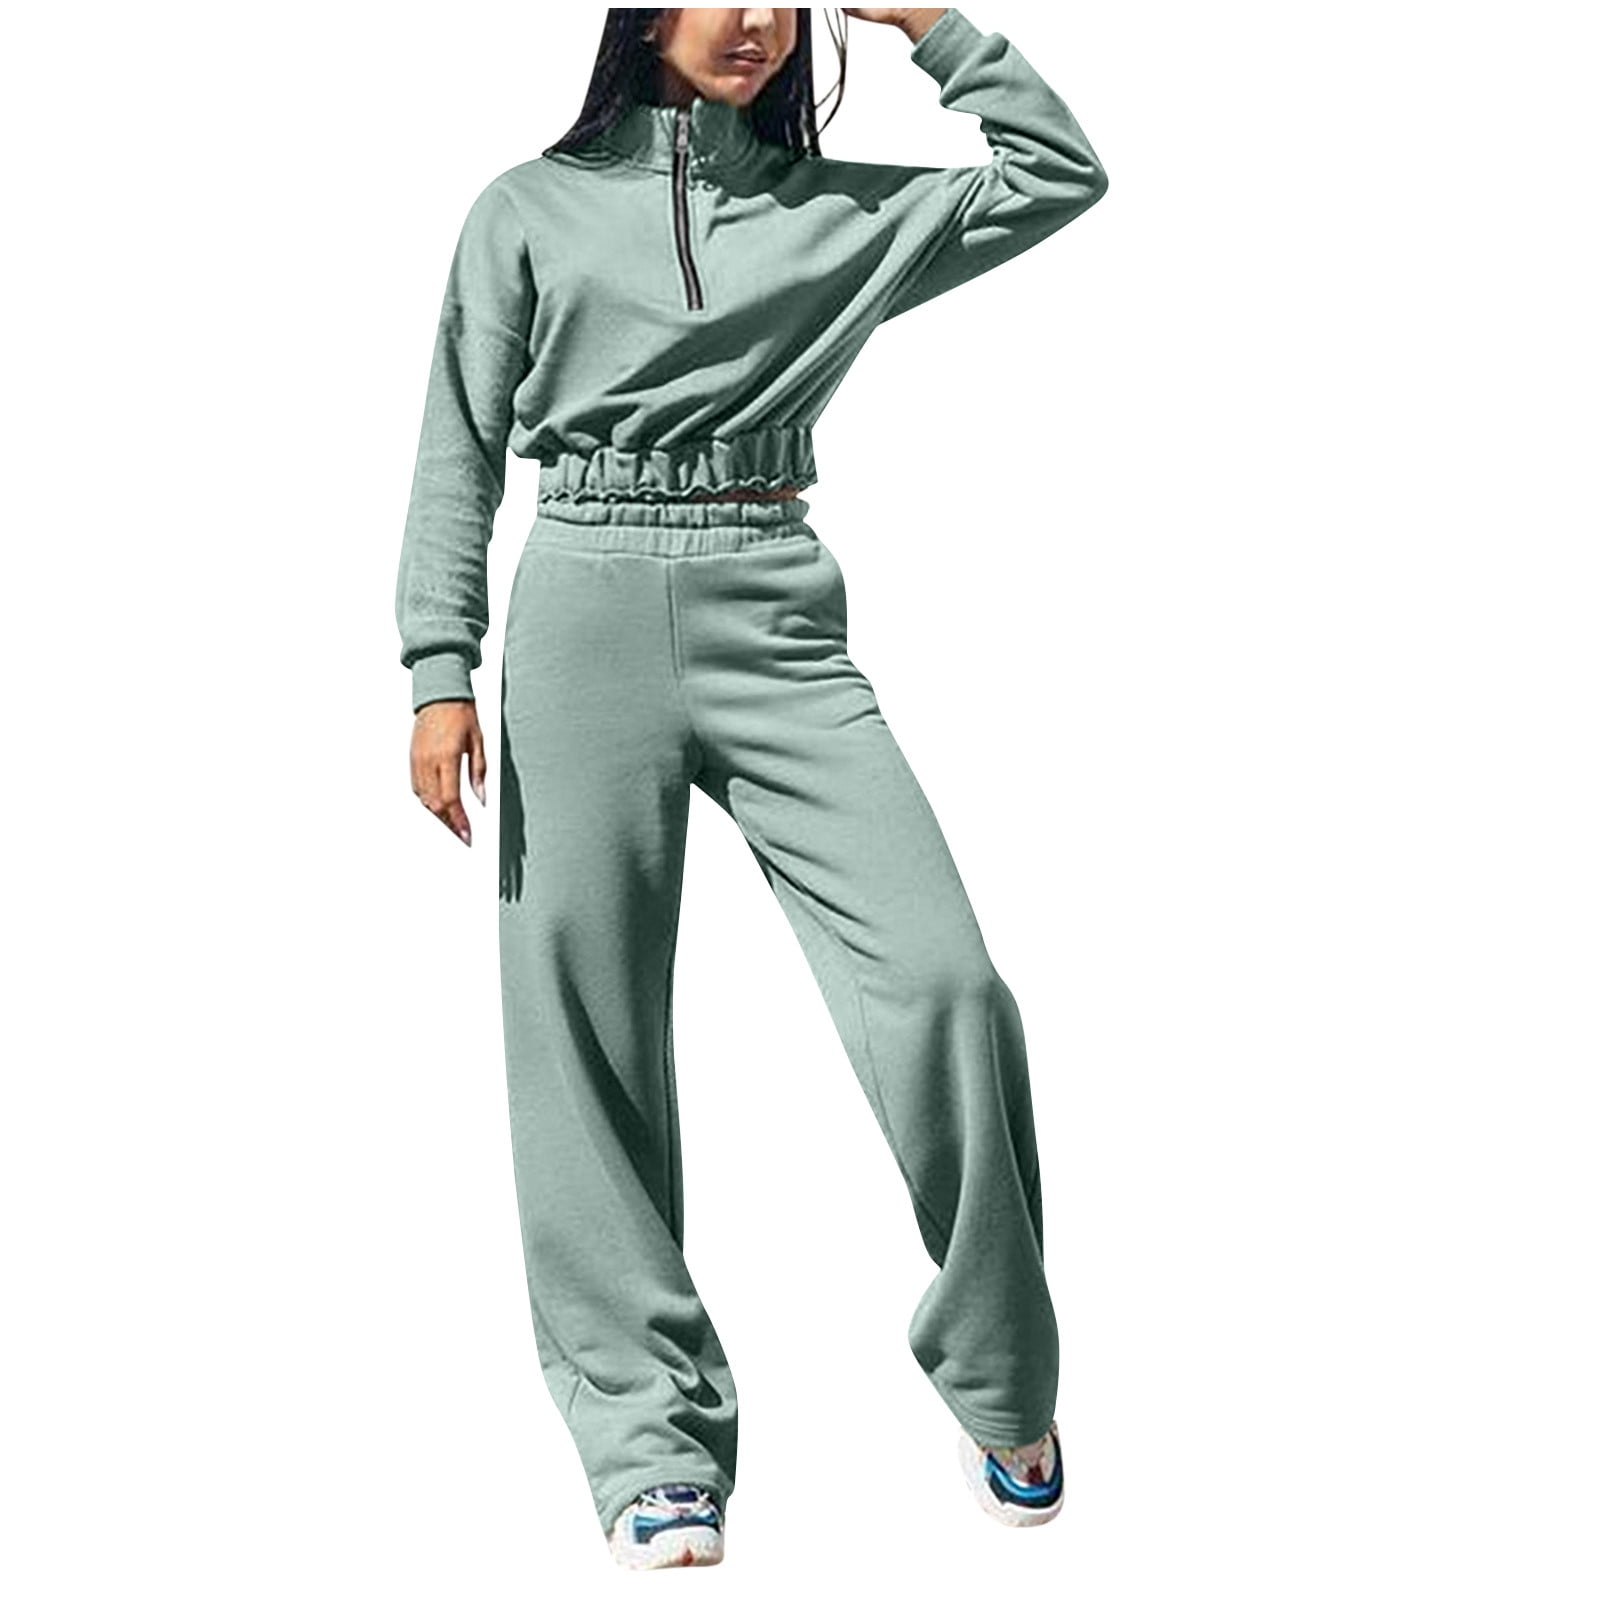 Pant outfits for women, Track suits women, Pink sweat suits